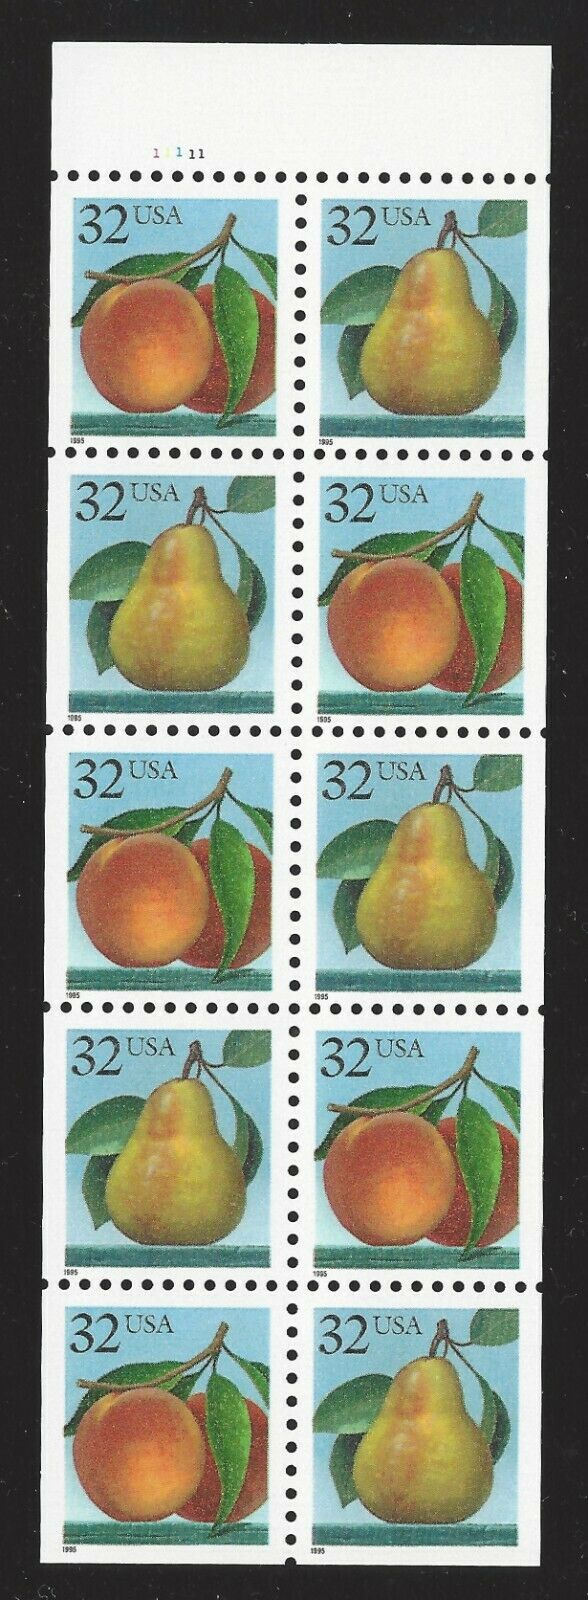 1995 Us #2488a 32c Fruit Stamp Booklet Pane Of 10 Nh Unfolded Choice Cv $7.25